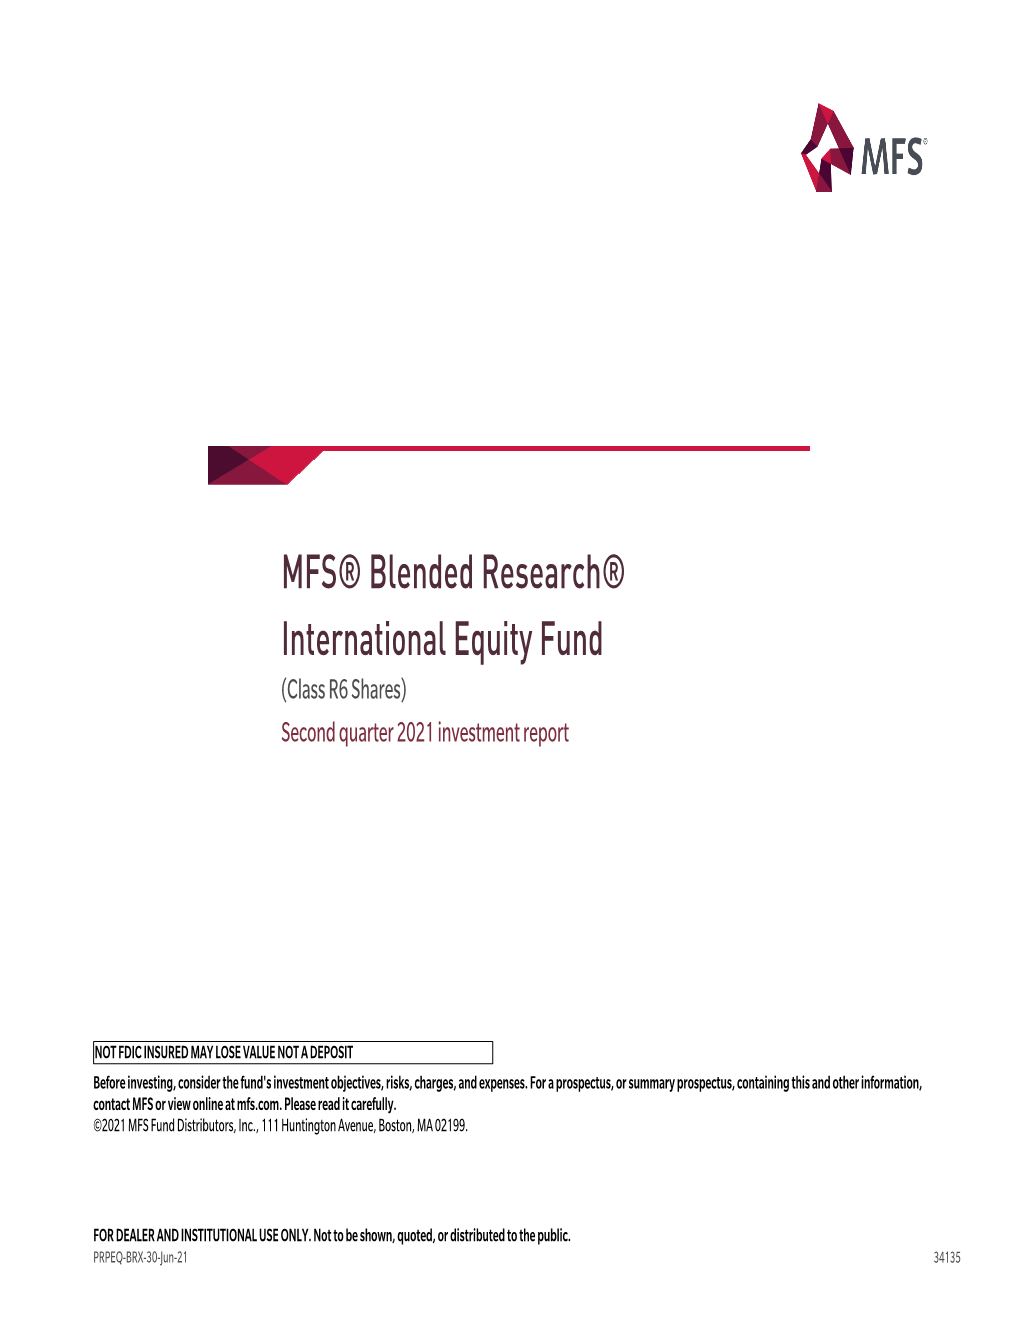 MFS® Blended Research® International Equity Fund (Class R6 Shares) Second Quarter 2021 Investment Report